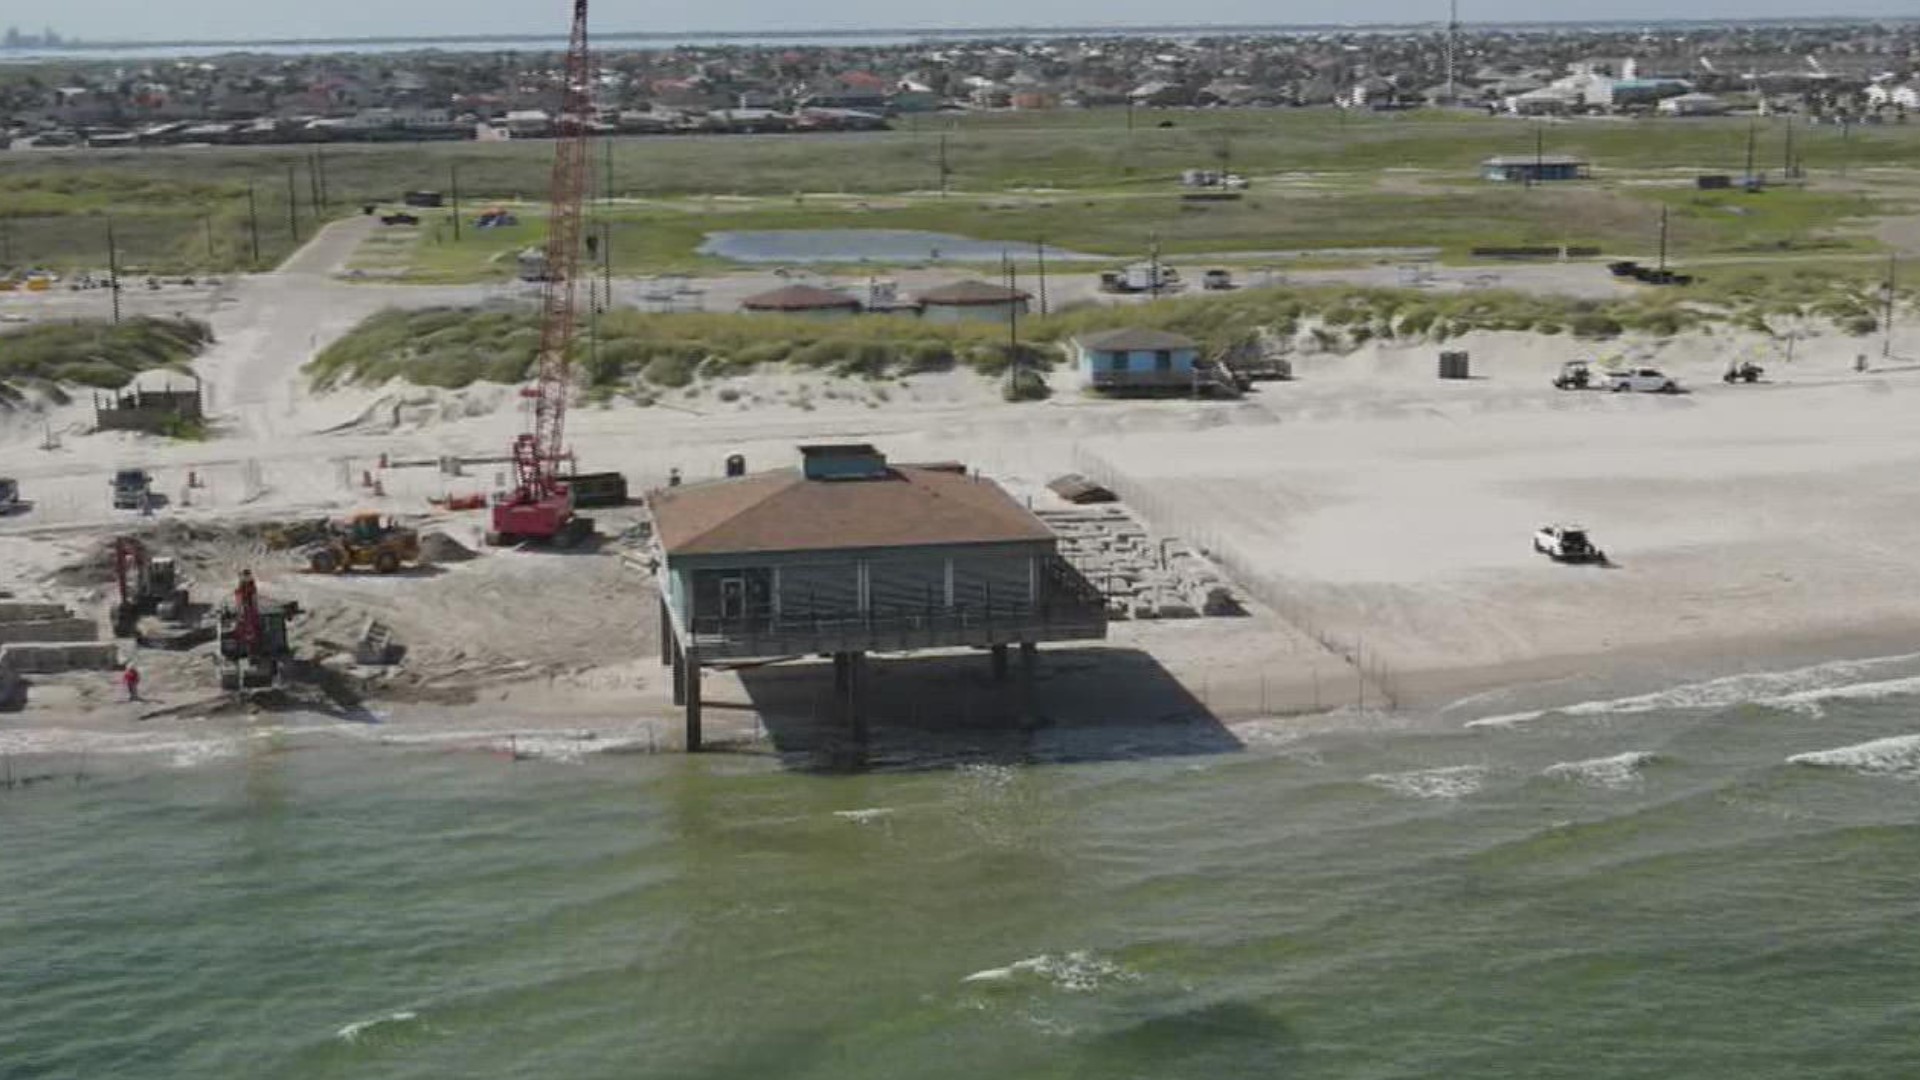 The pier was severely damaged when Hurrican Hanna came through the Coastal Bend in 2020.